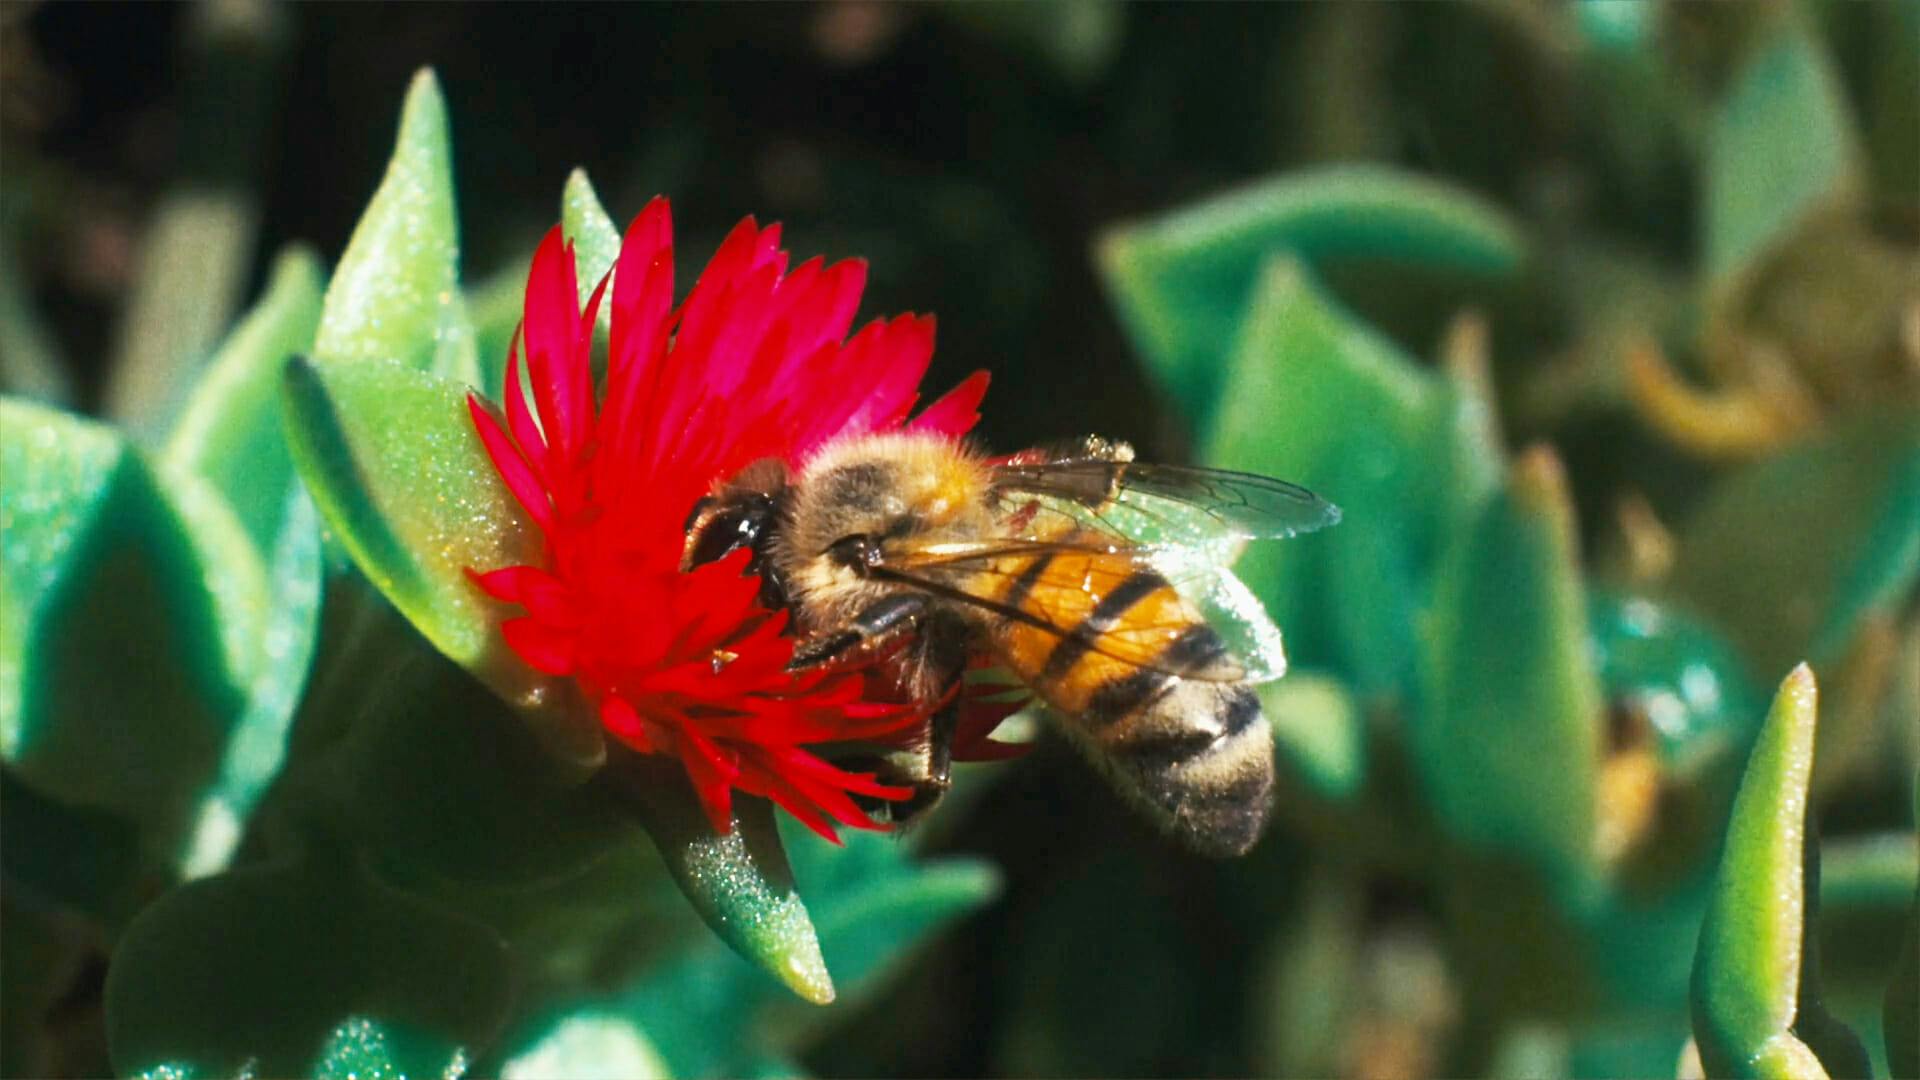 Pornhub environmental initiative shows bees getting busy … pollinating